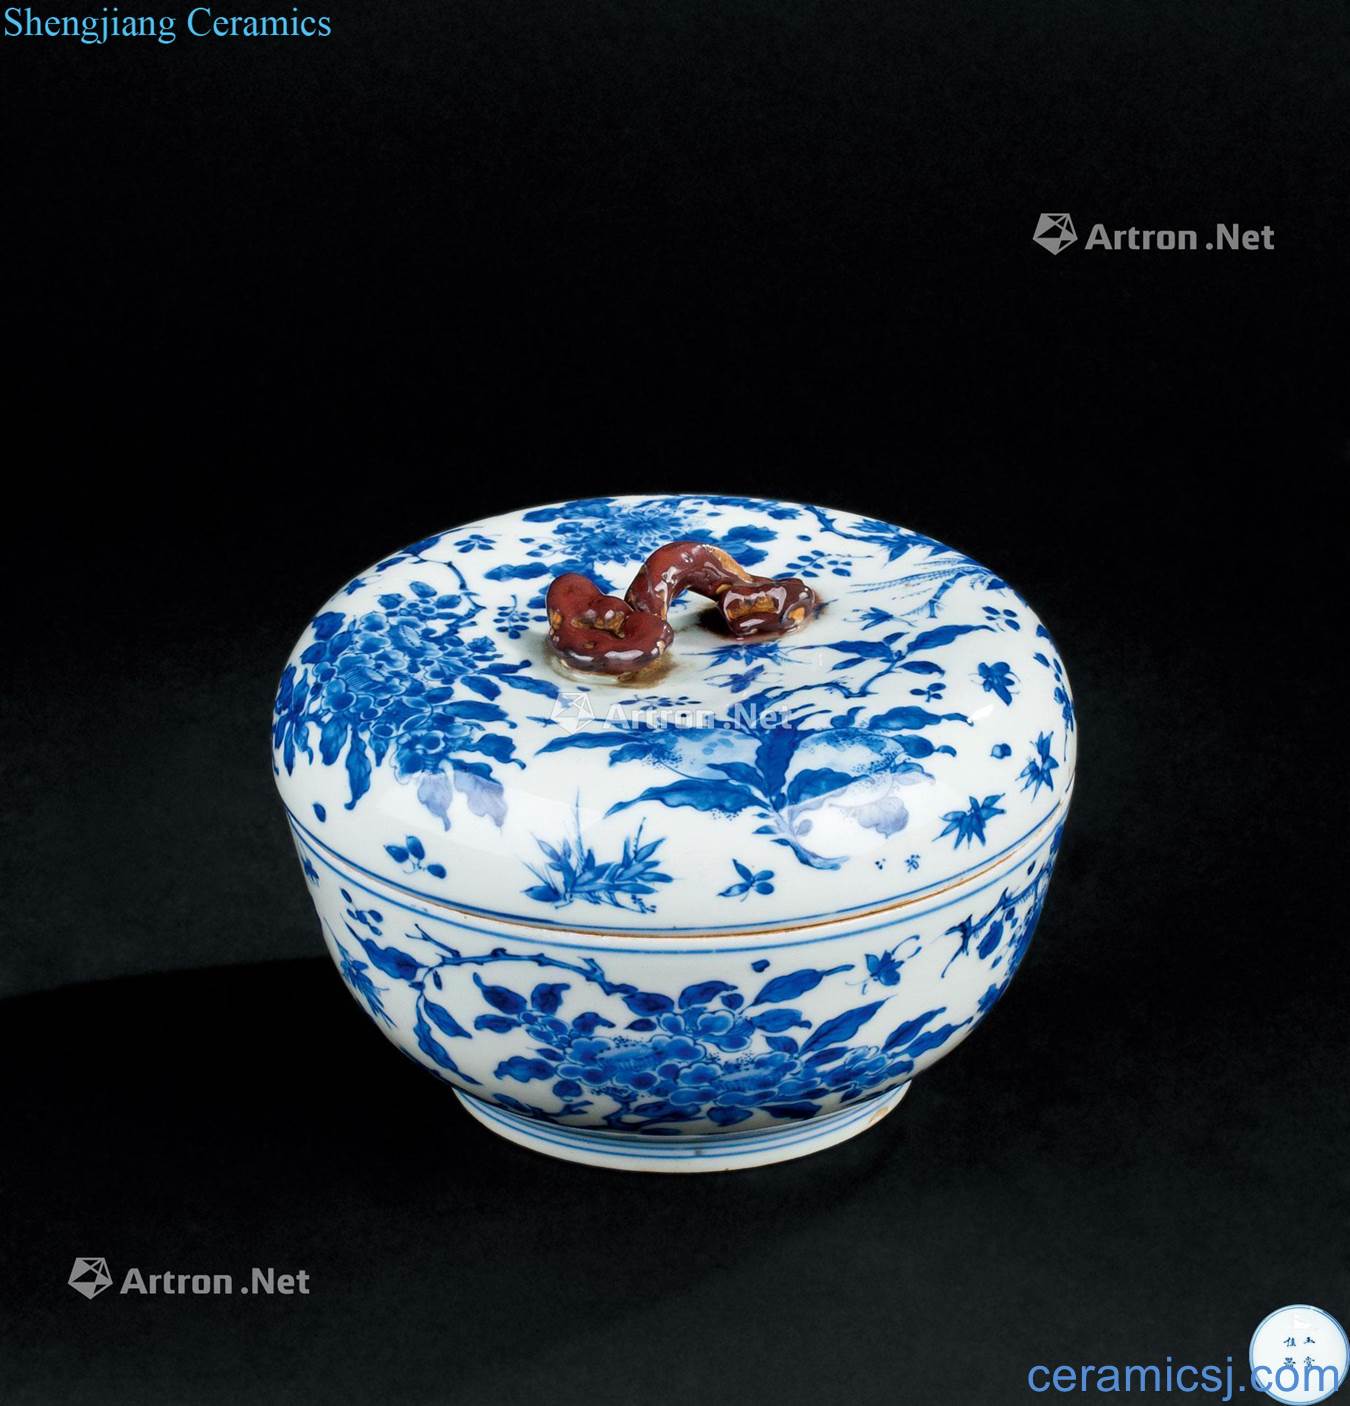 Late Ming dynasty (about 1627-1627) blue and white flower butterfly tattoo ganoderma lucidum button box